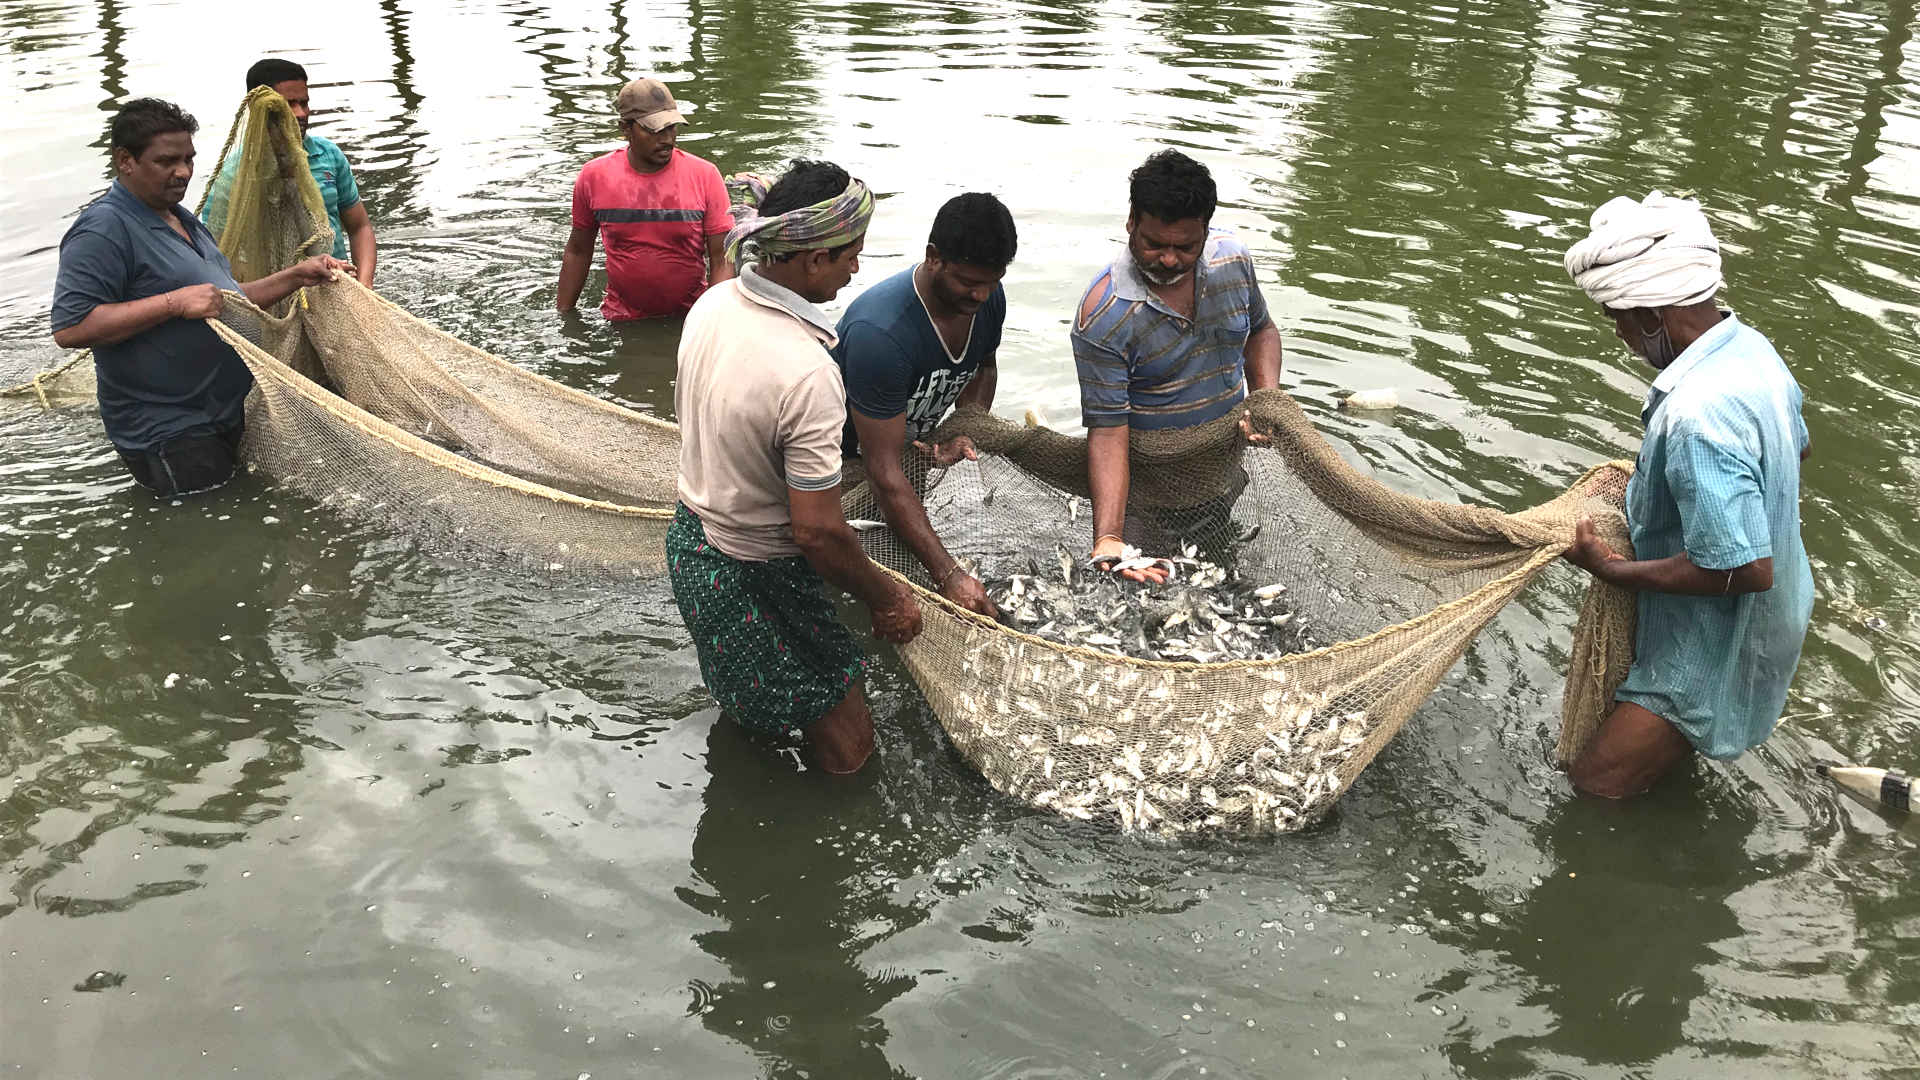 Farmers examine their catch from a human-made fish pond. On Kollerlu Lake, ponds such as this were once limited to the shoreline and shallows.
All photos by MONIKA MONDAL for UNDARK